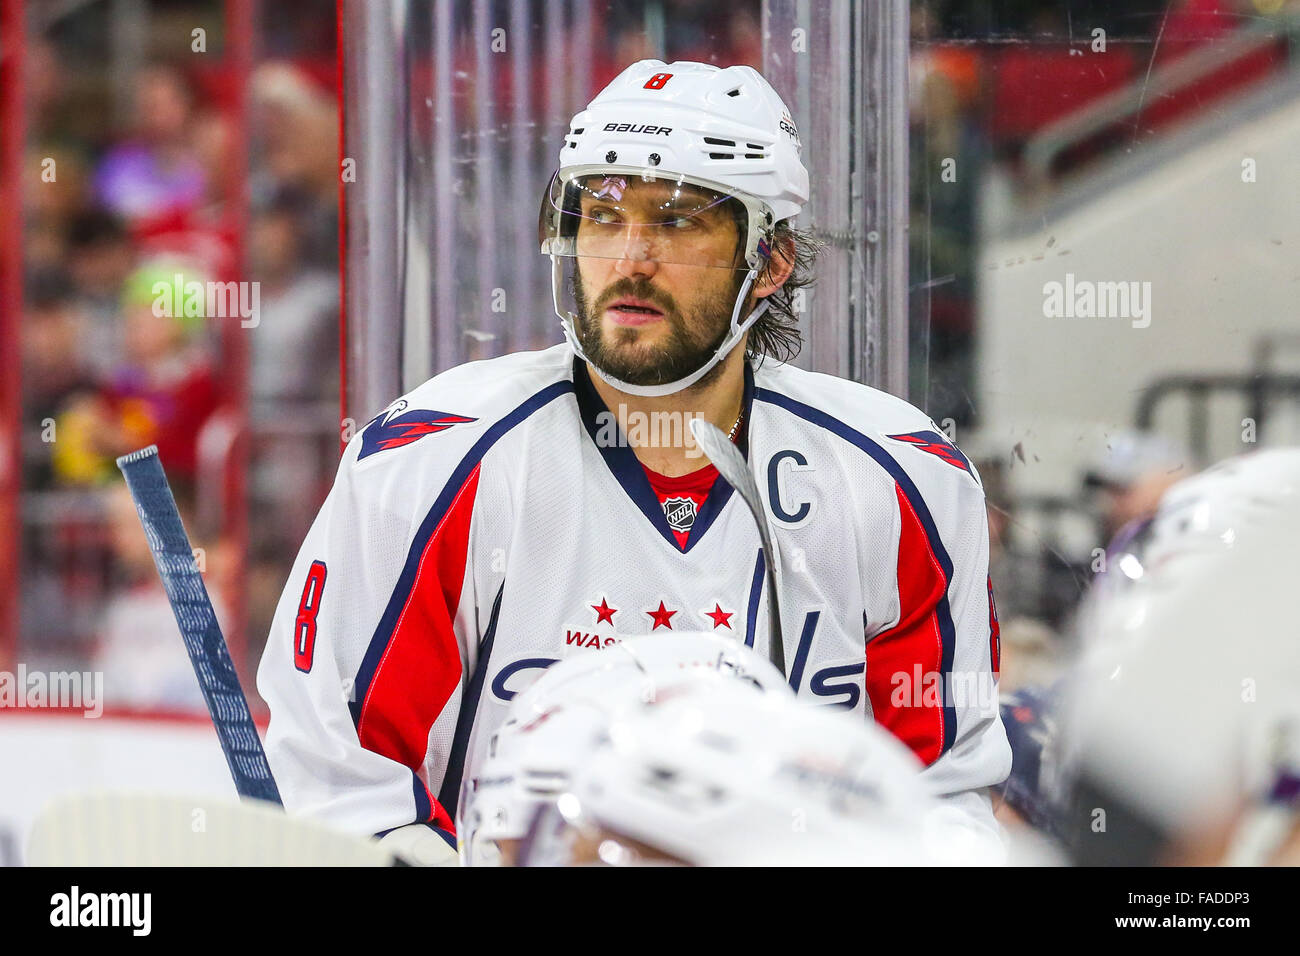 Washington Capitals left wing Alex Ovechkin (8) during the NHL game between the Washington Capitals and the Carolina Hurricanes at the PNC Arena. Stock Photo